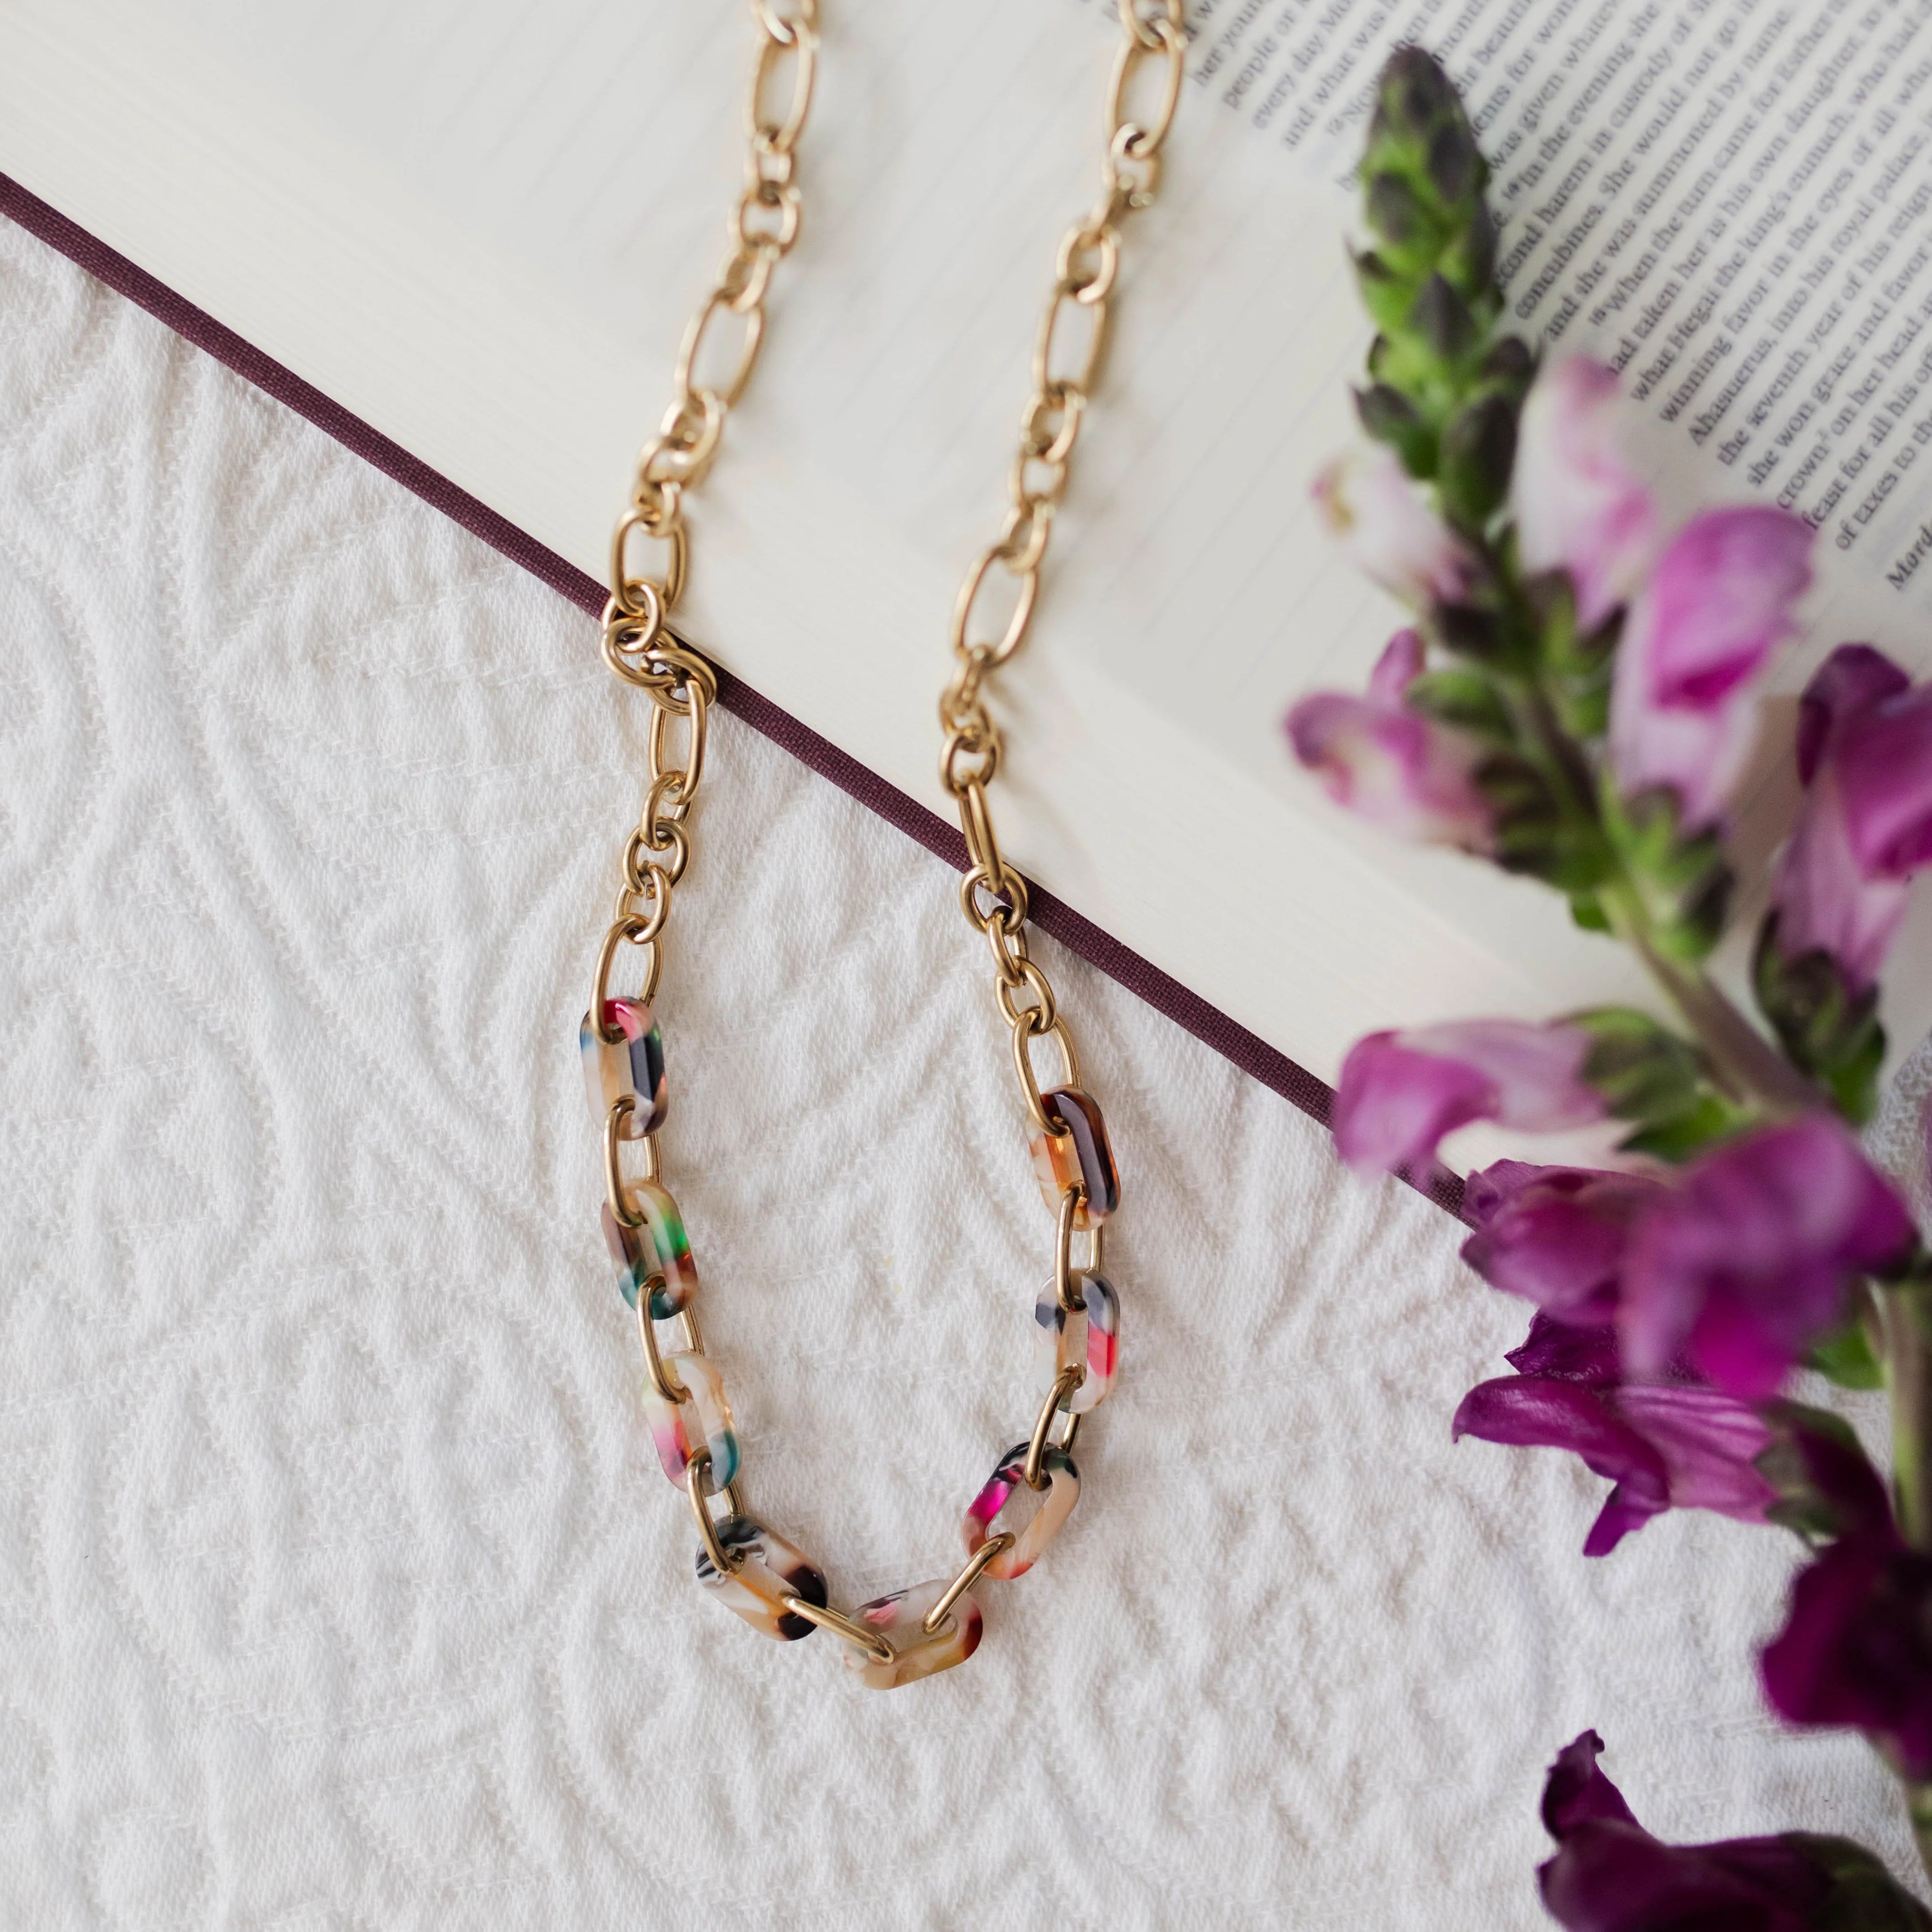 One Another Necklace | TDGC | The Daily Grace Co.